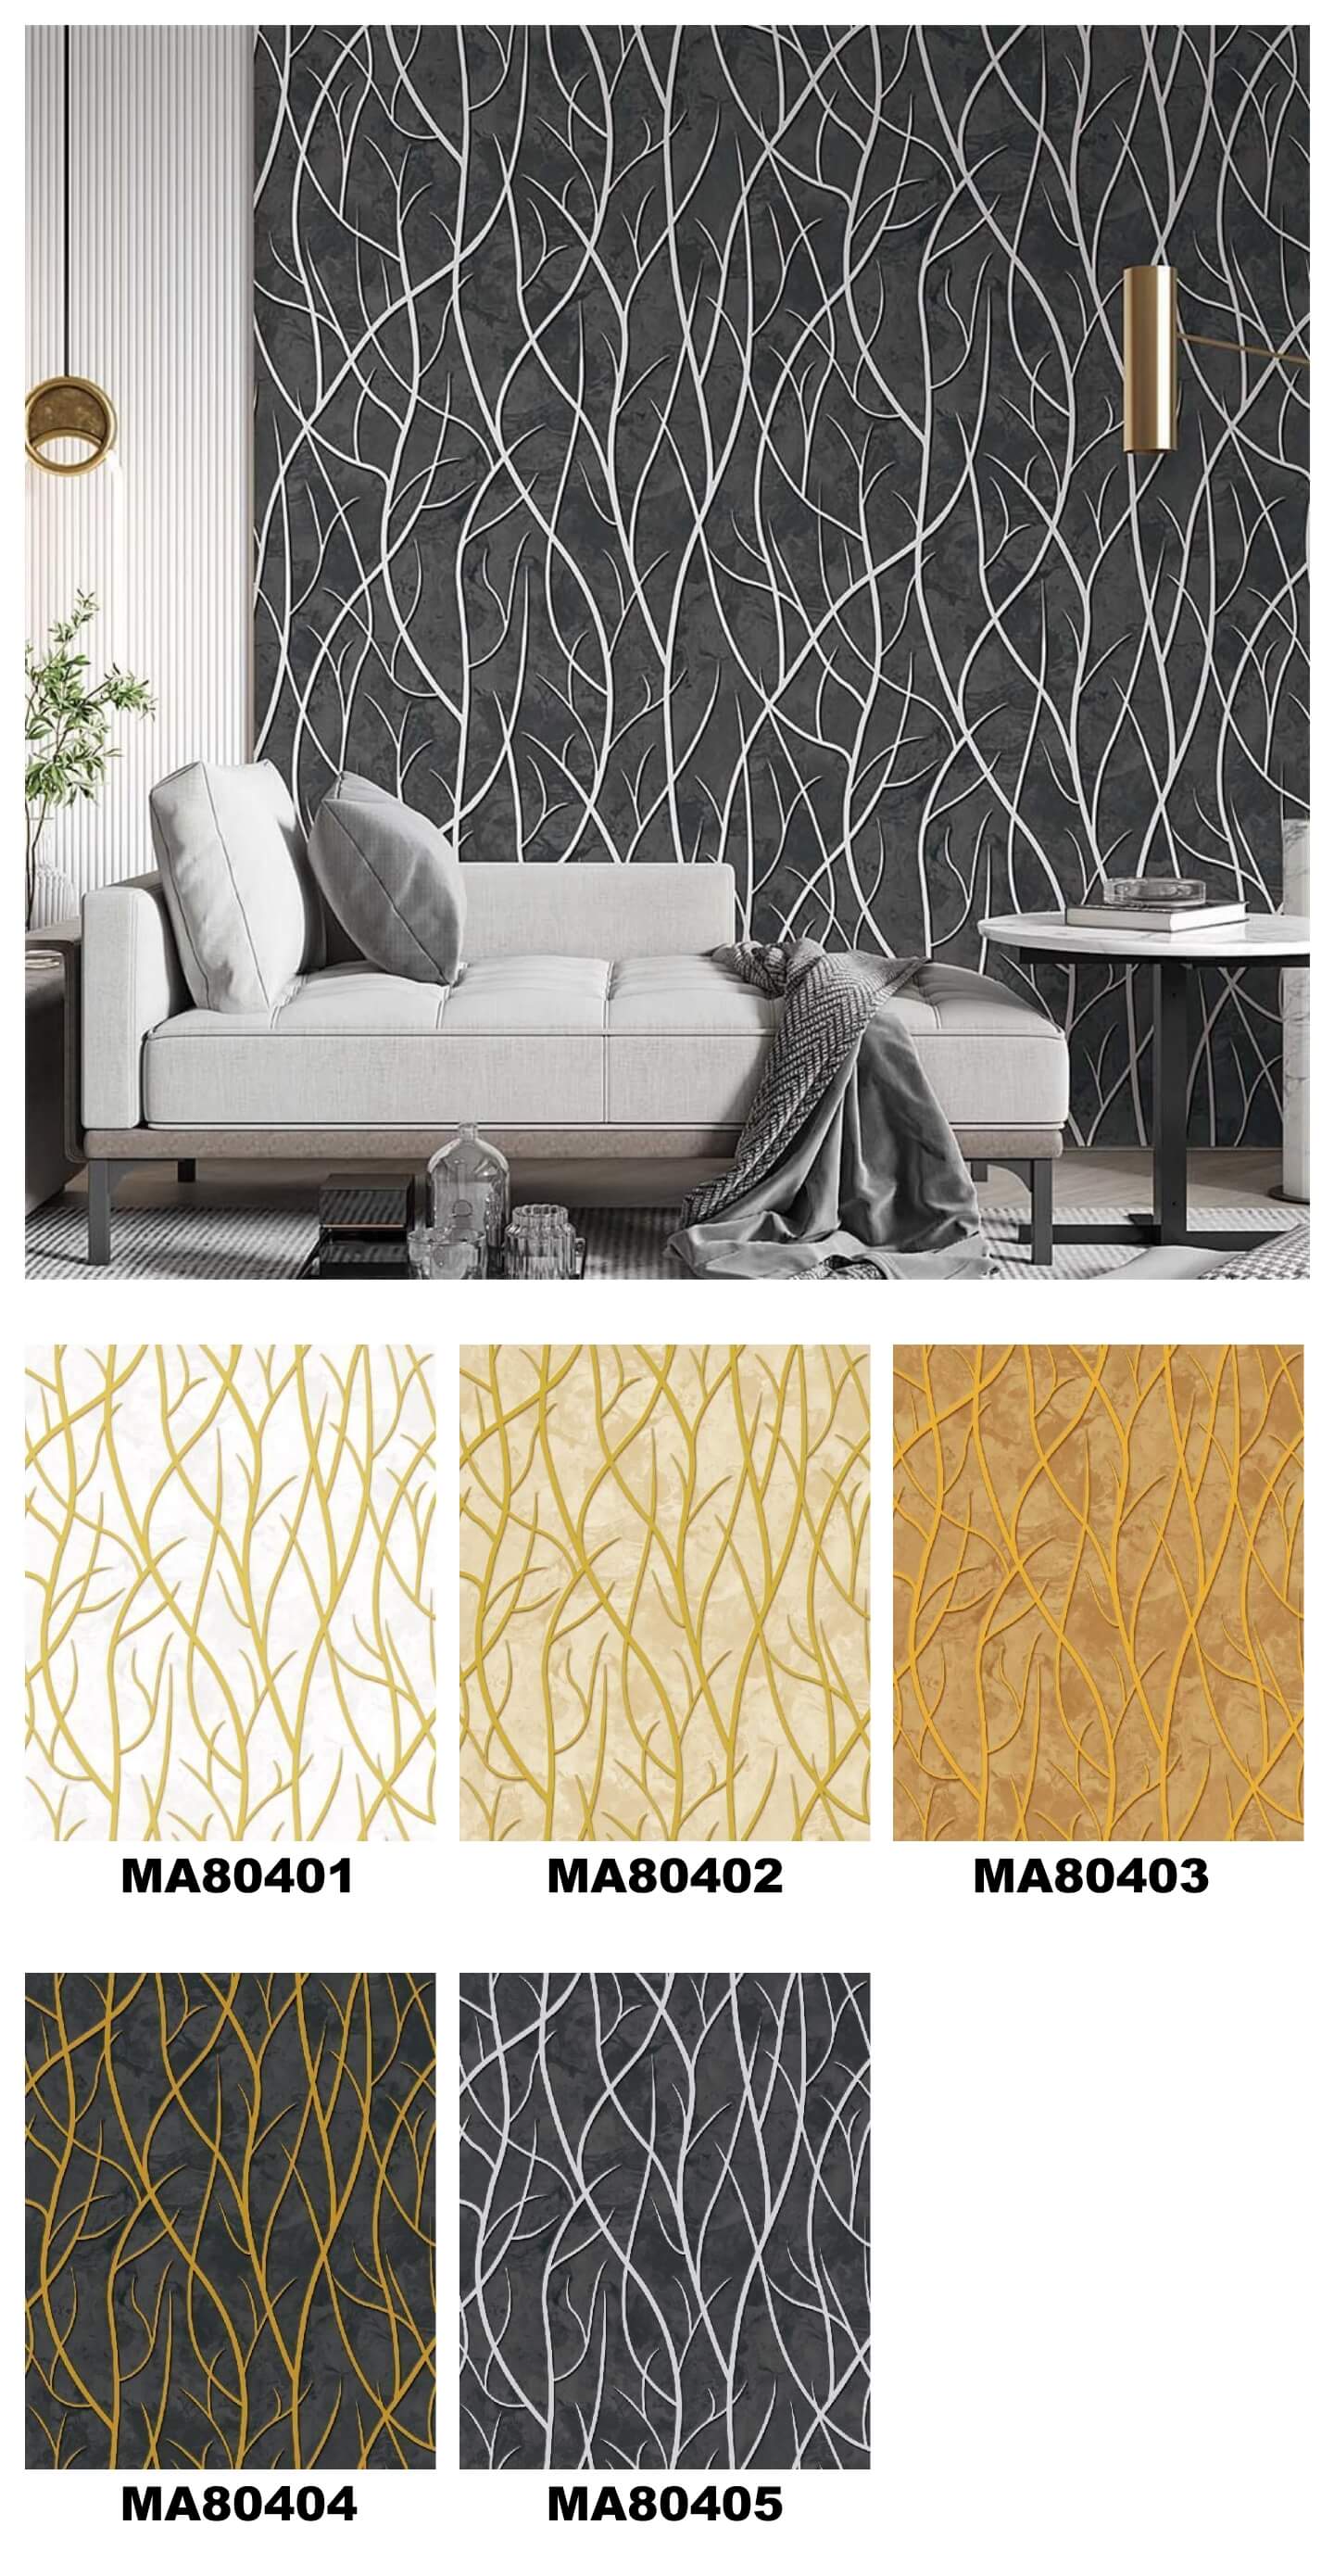 Beautiful Color 3D Design Wallpaper Better choice For Living Area, Bedroom, kids room, Office Durable PVC Wallpapers (4)